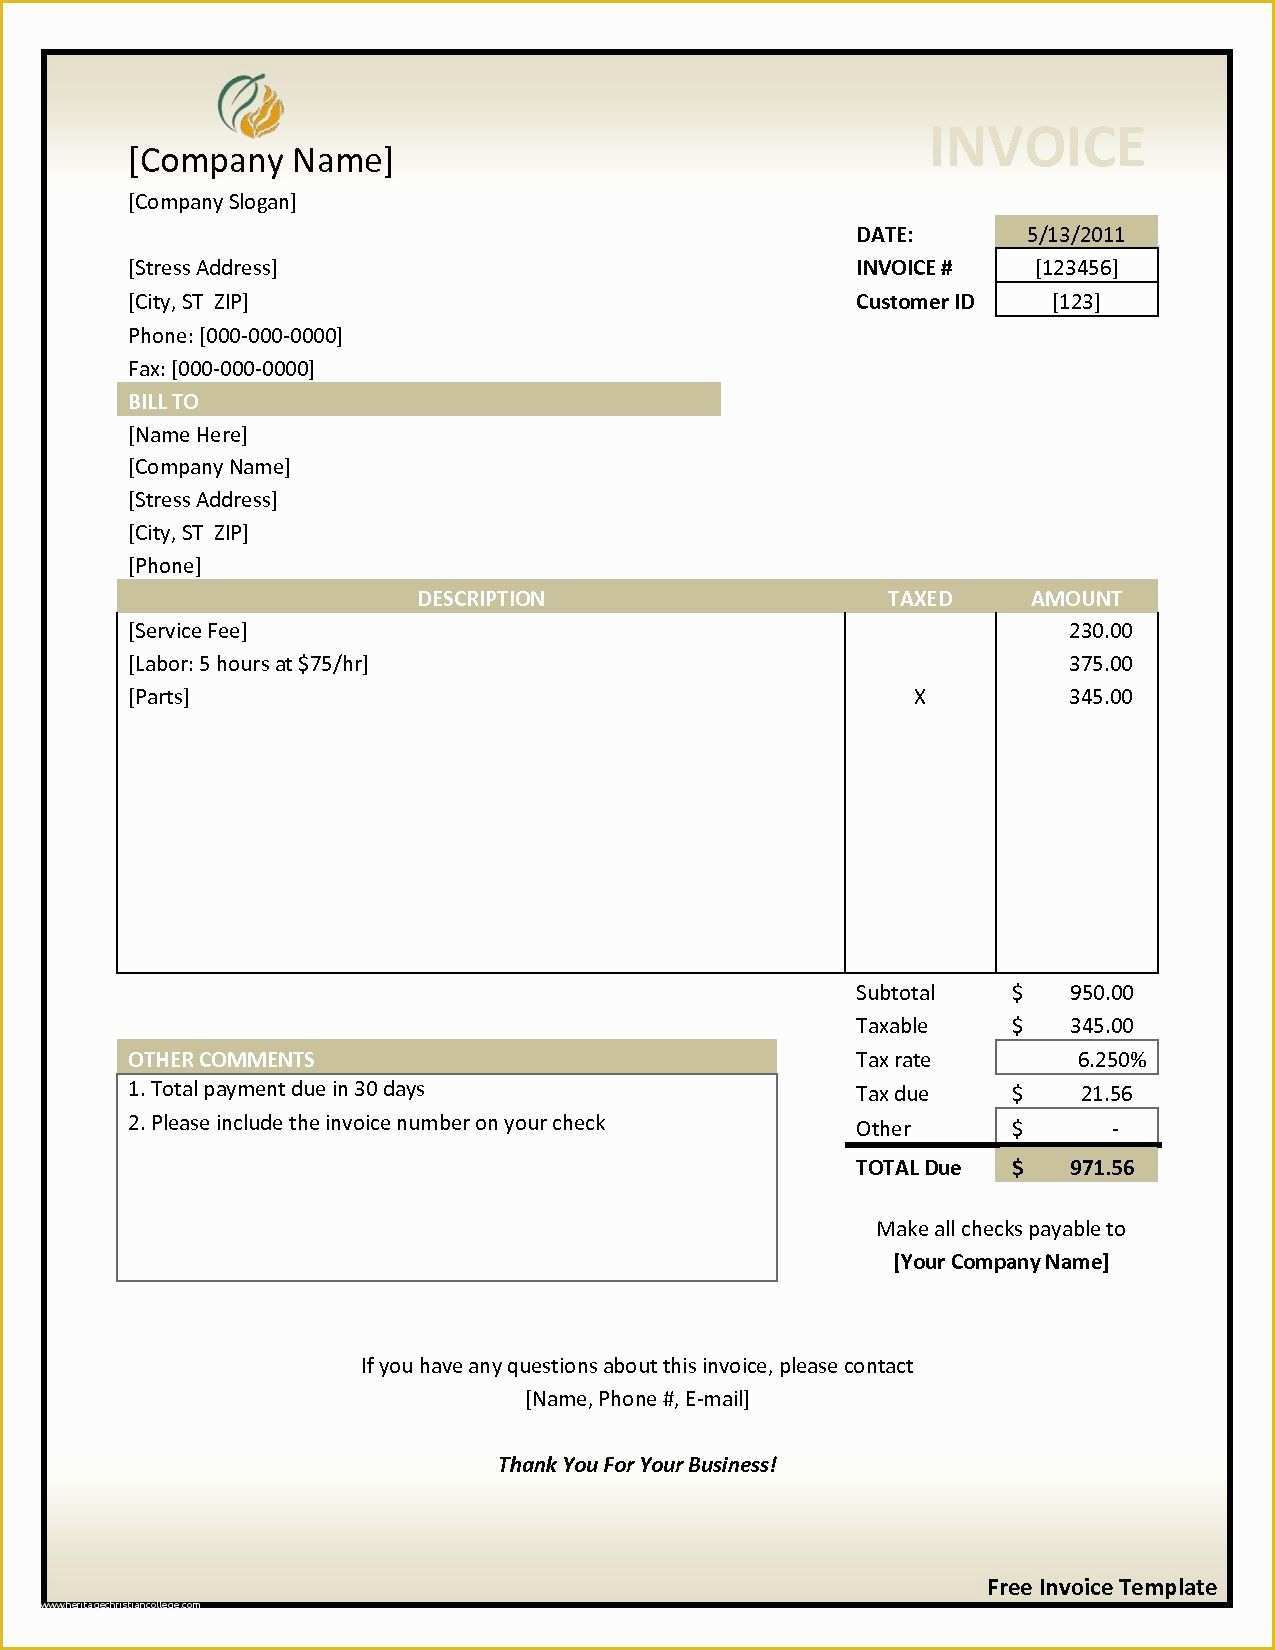 Free Invoice Template Of Sample Invoice Invoice Template Free 2016 Free